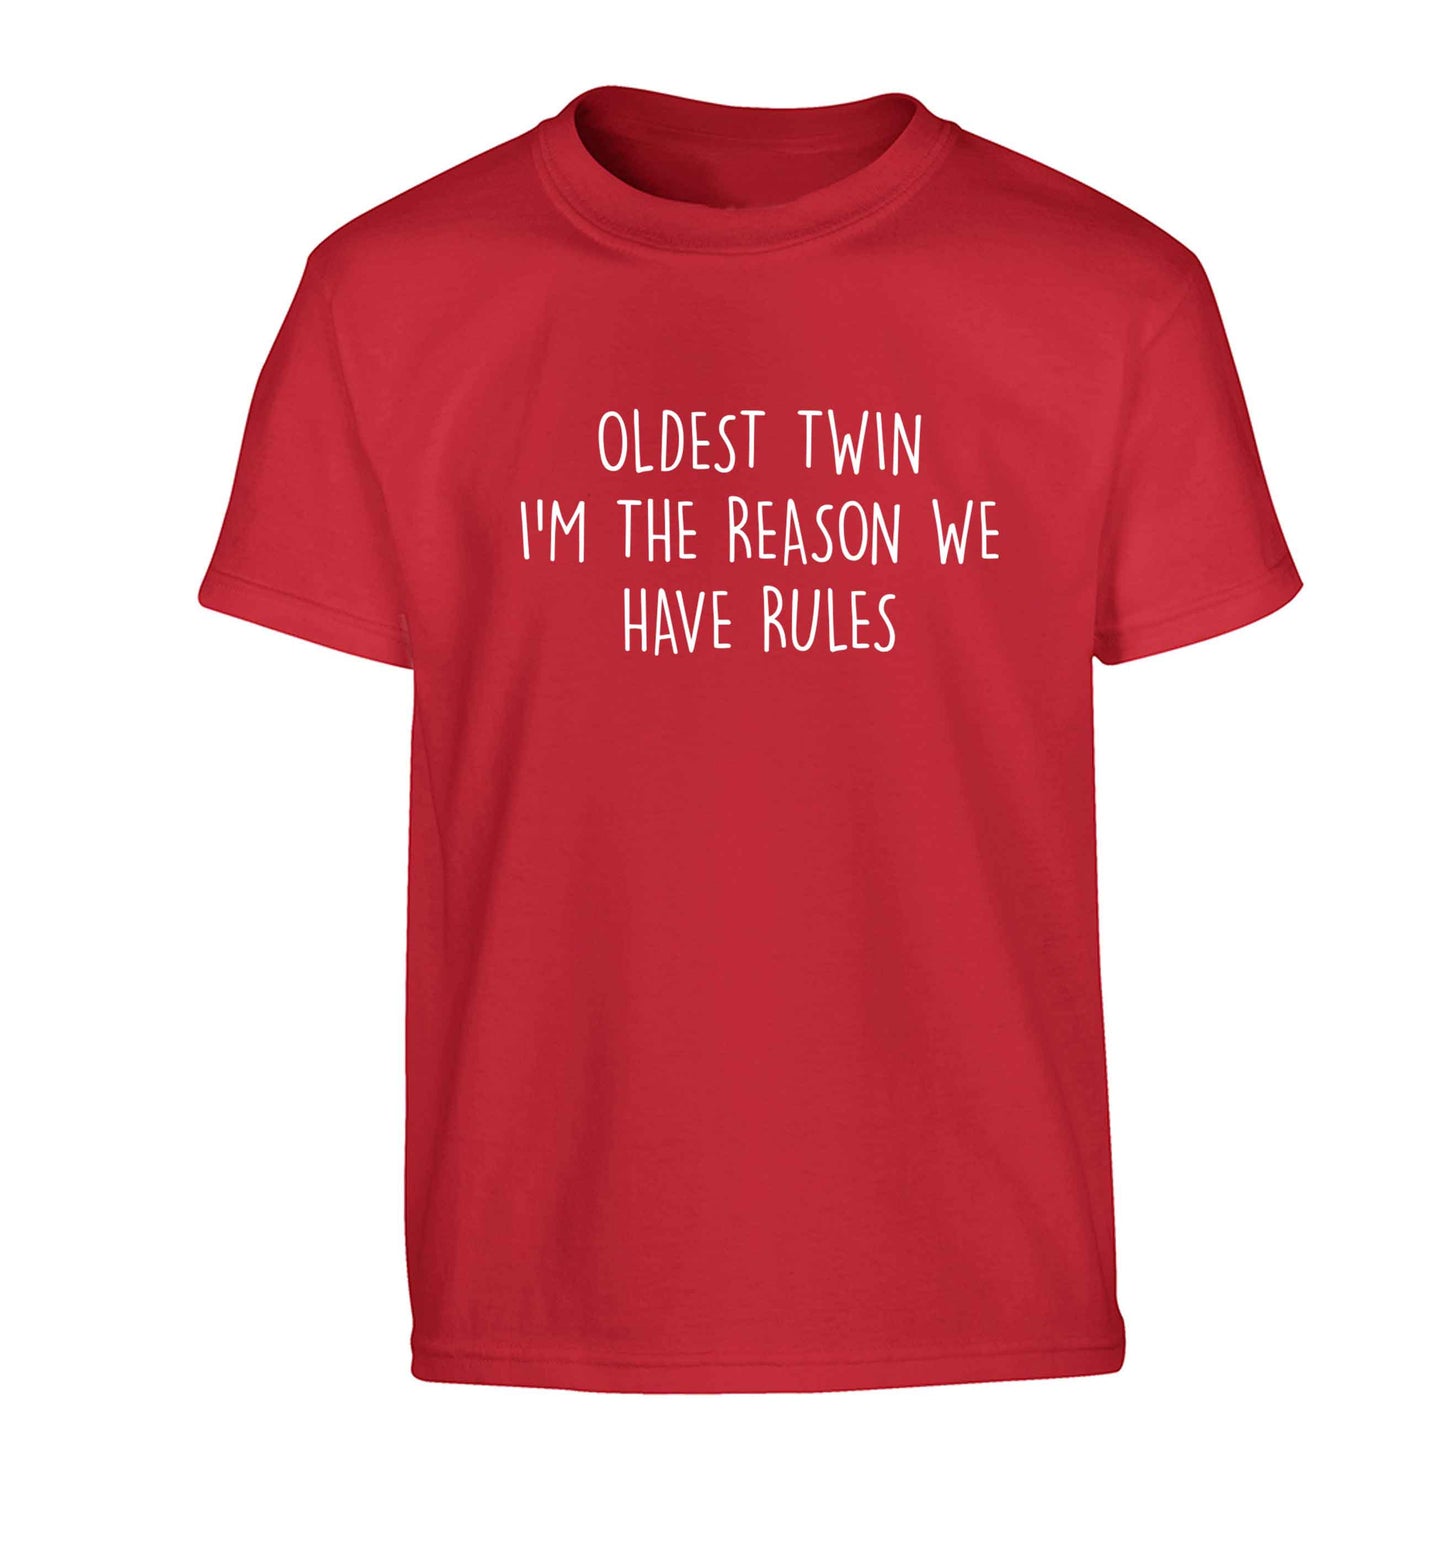 Oldest twin I'm the reason we have rules Children's red Tshirt 12-13 Years